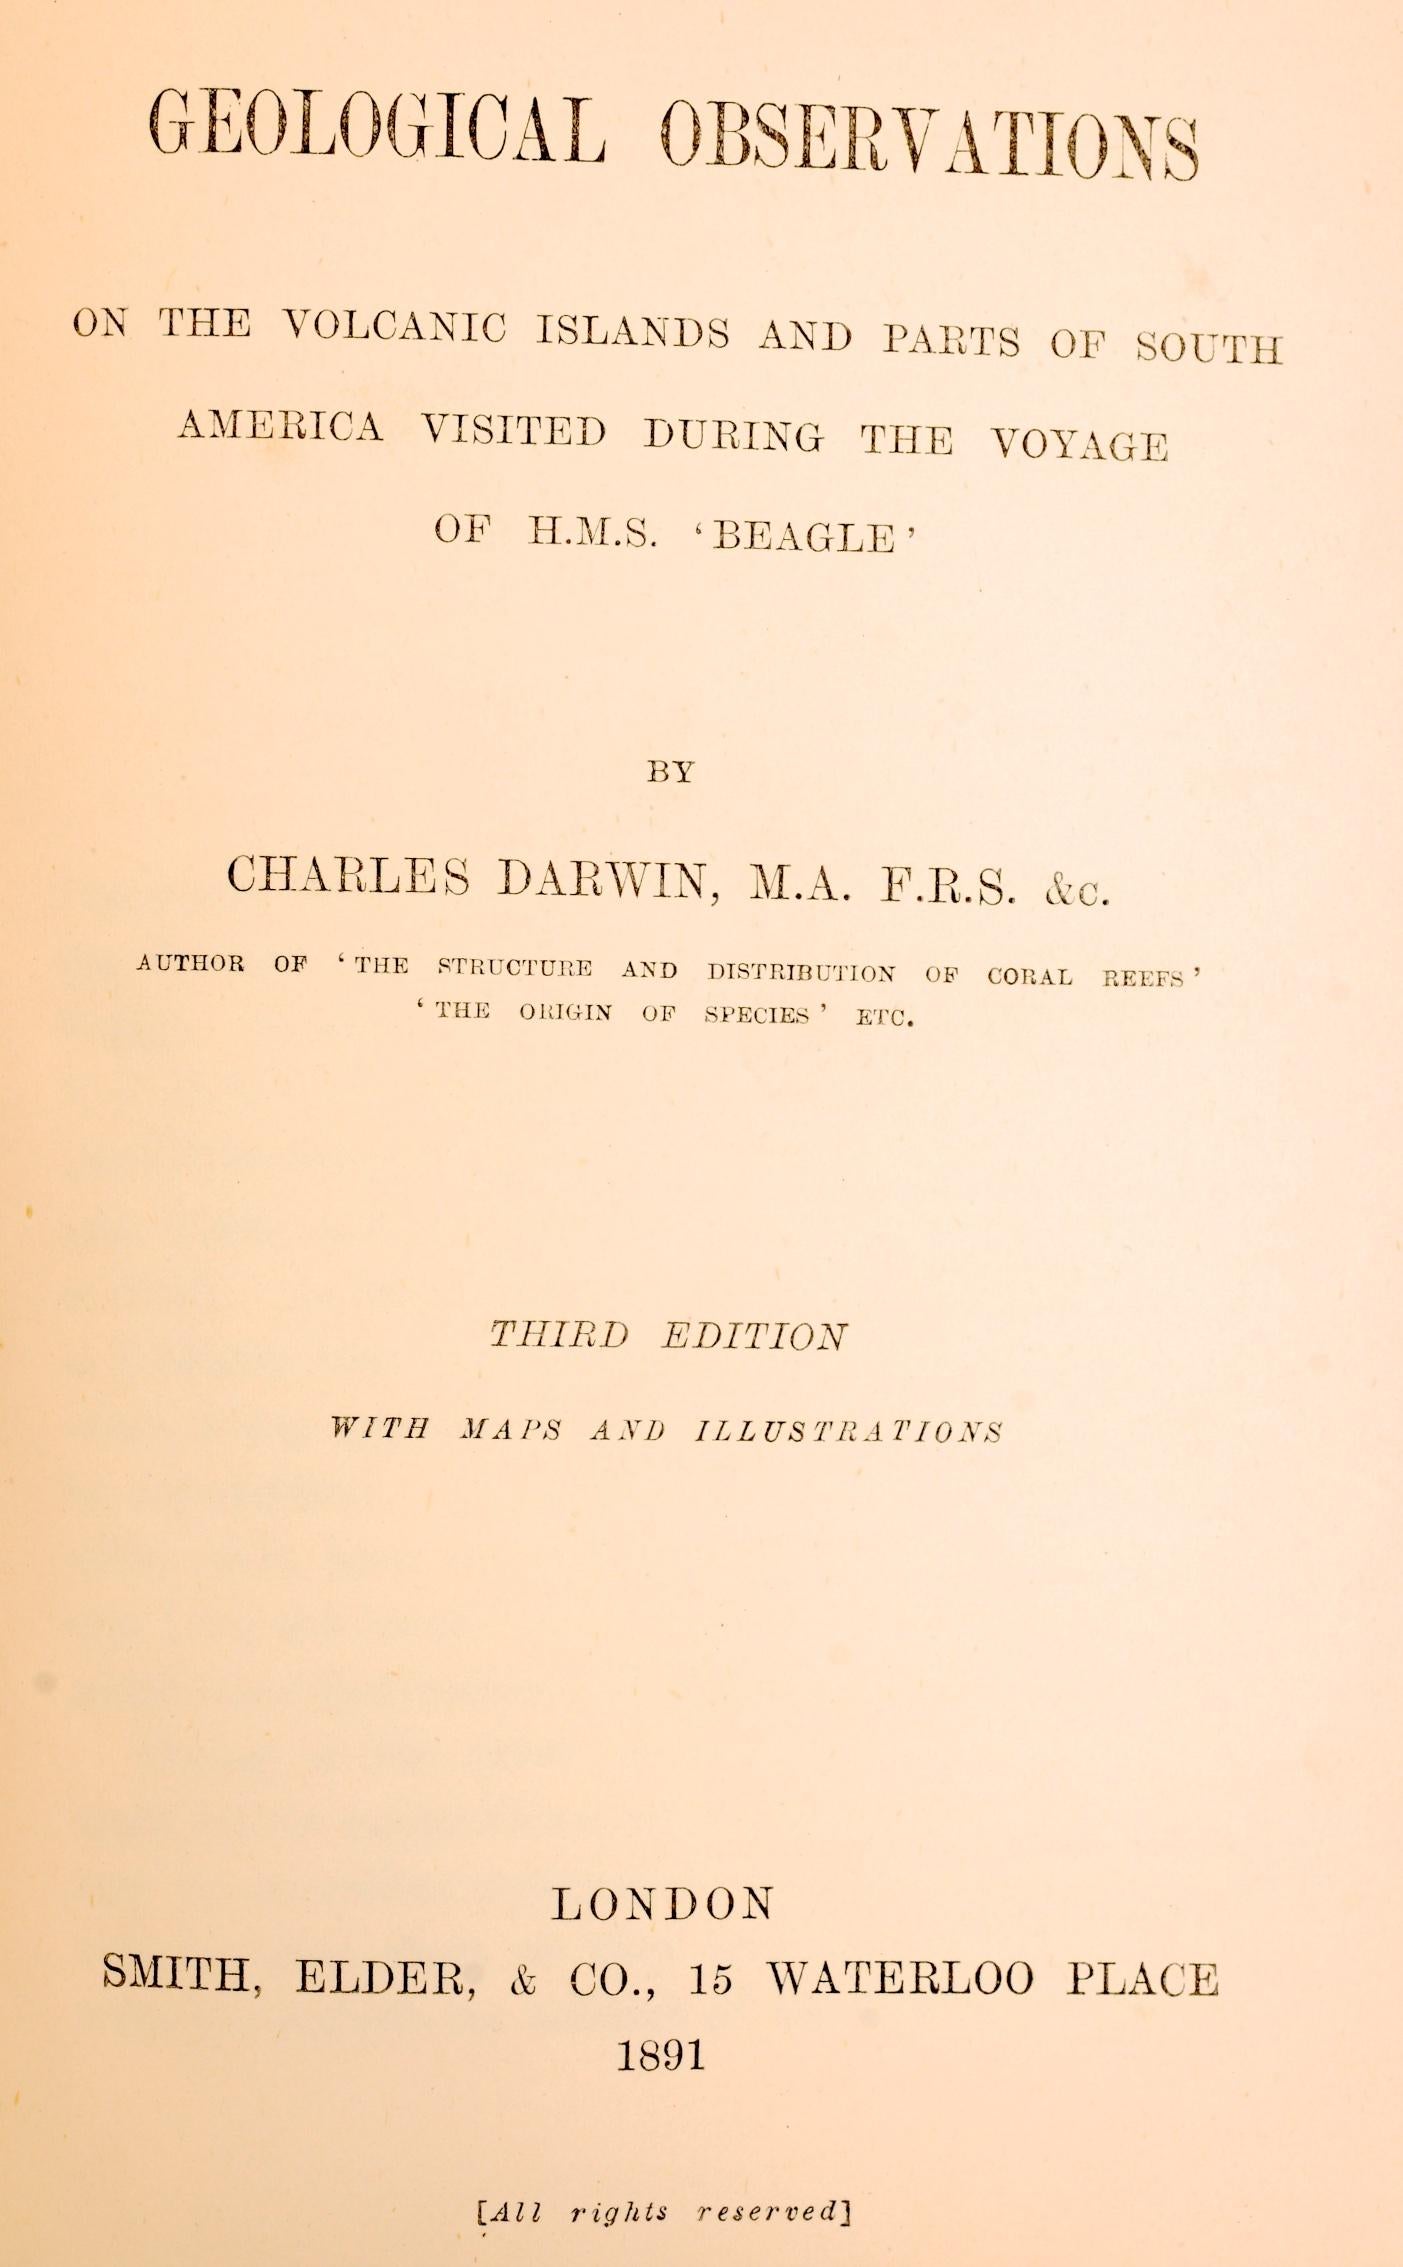 English Charles Darwin, Geological Observations on the Volcanic Islands, circa 1891